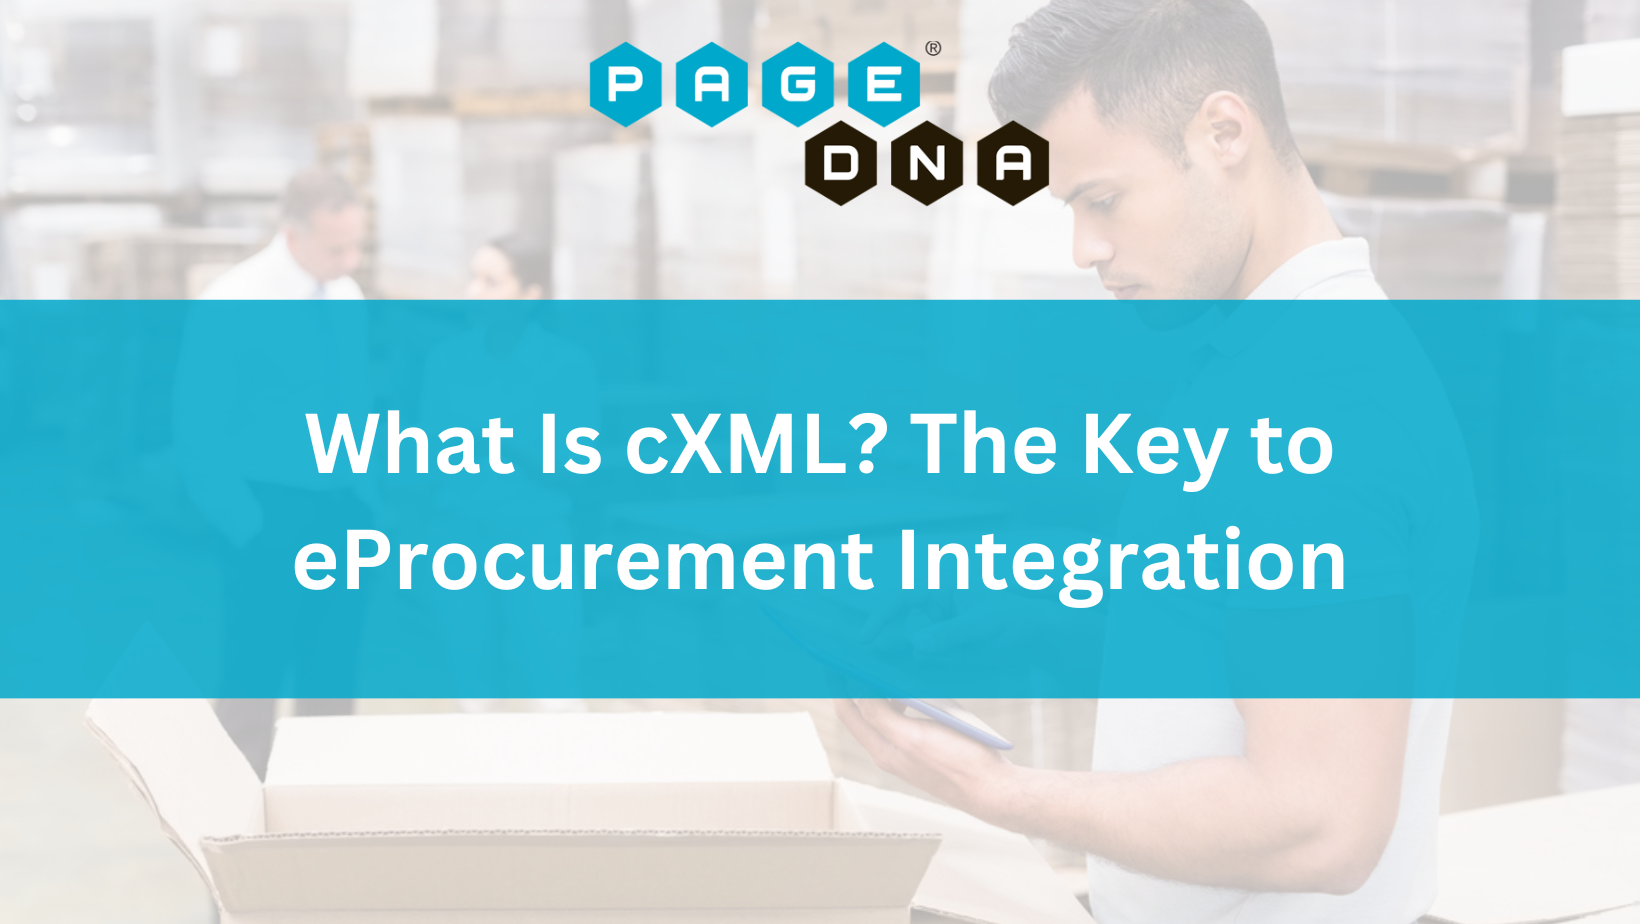 What Is cXML? The Key to eProcurement Integration